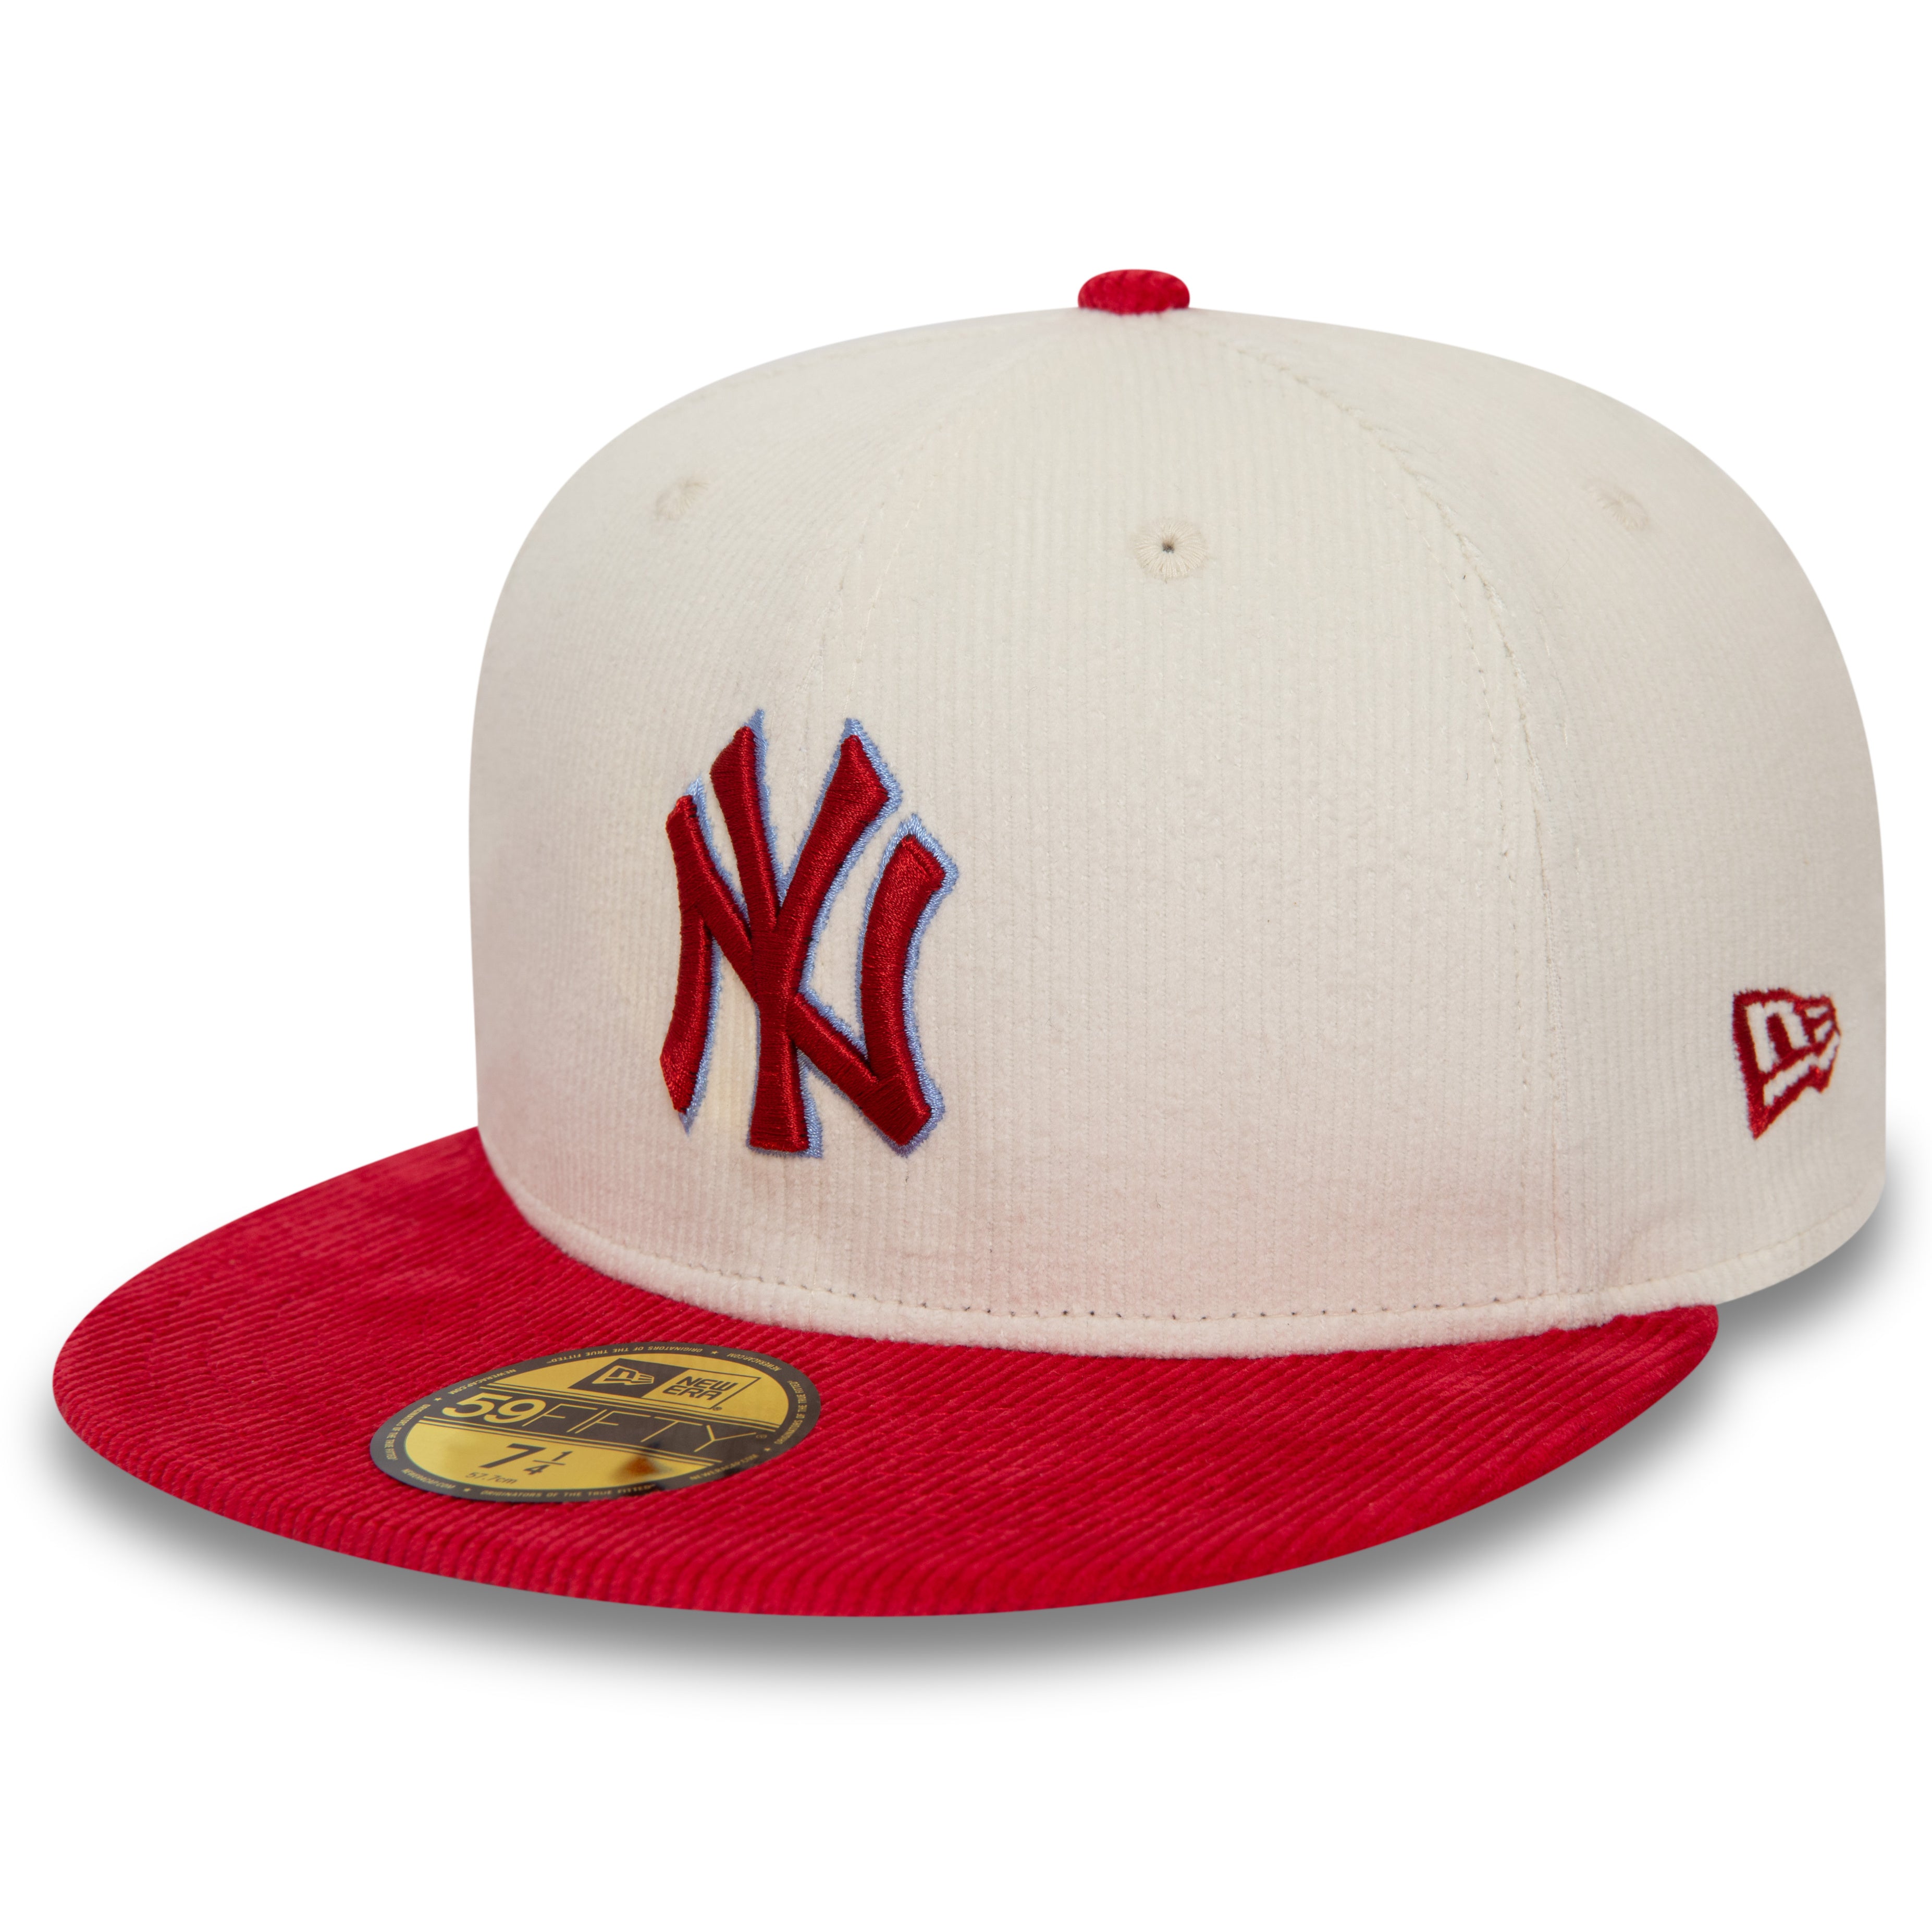 NEW ERA 59FIFTY MLB NEW YORK YANKEES CORD TWO TONE FITTED CAP